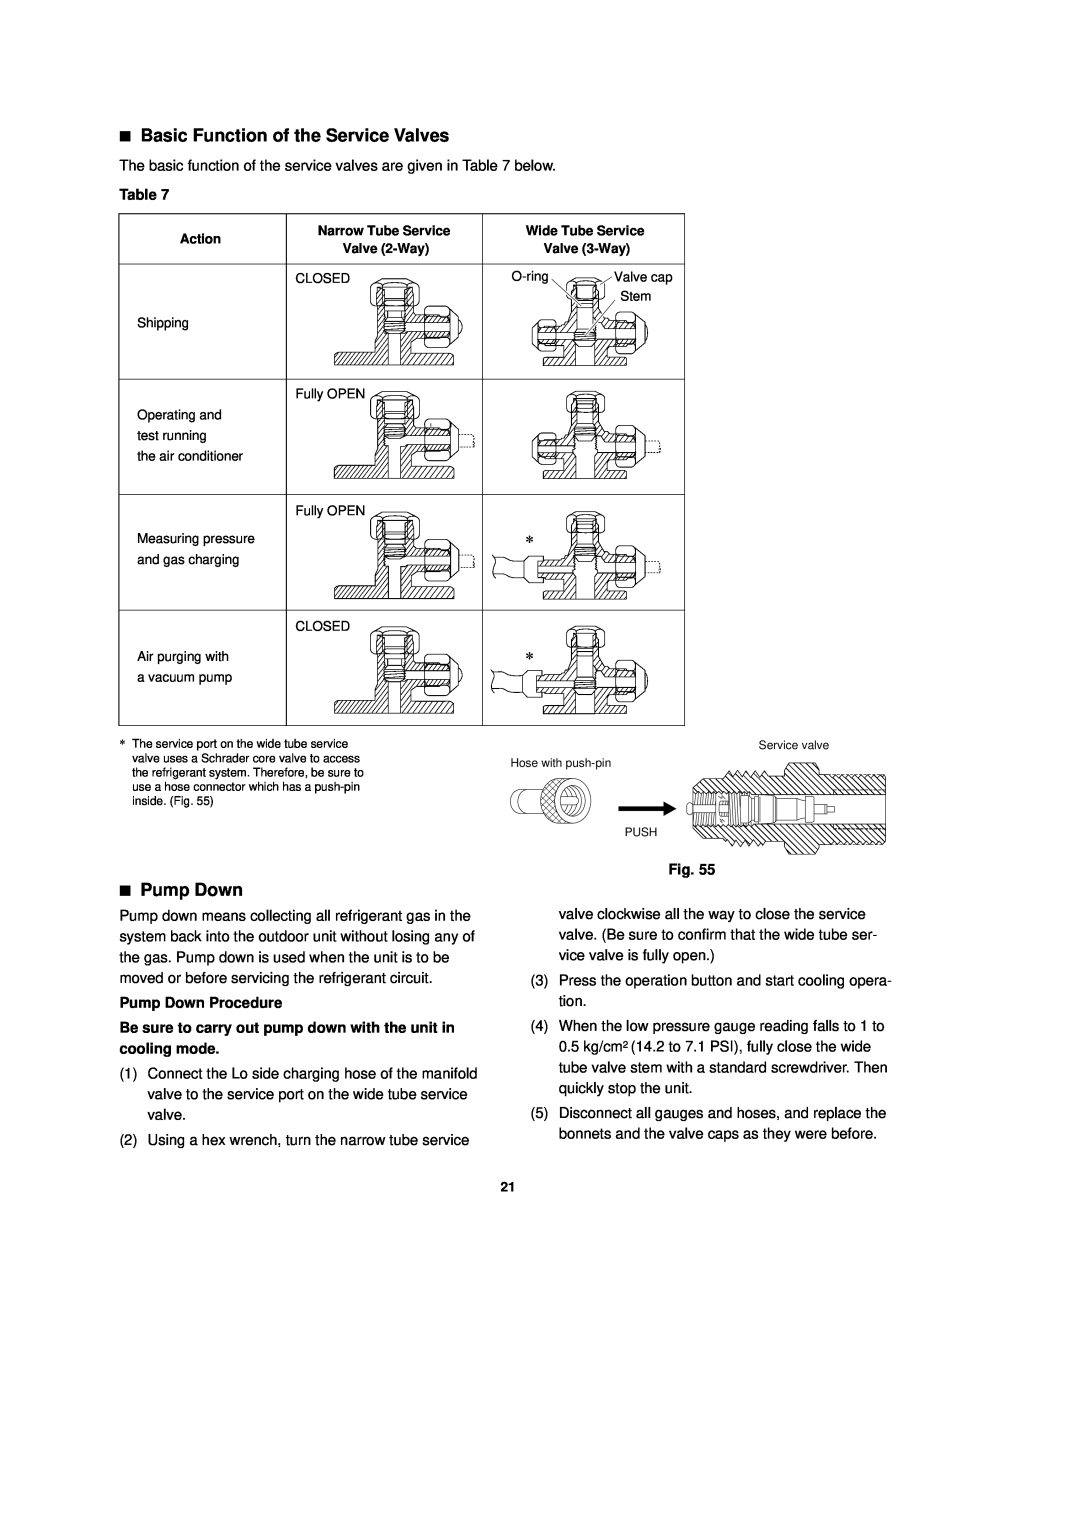 Sanyo CH0951, CH1251 installation instructions Basic Function of the Service Valves, Pump Down Procedure 